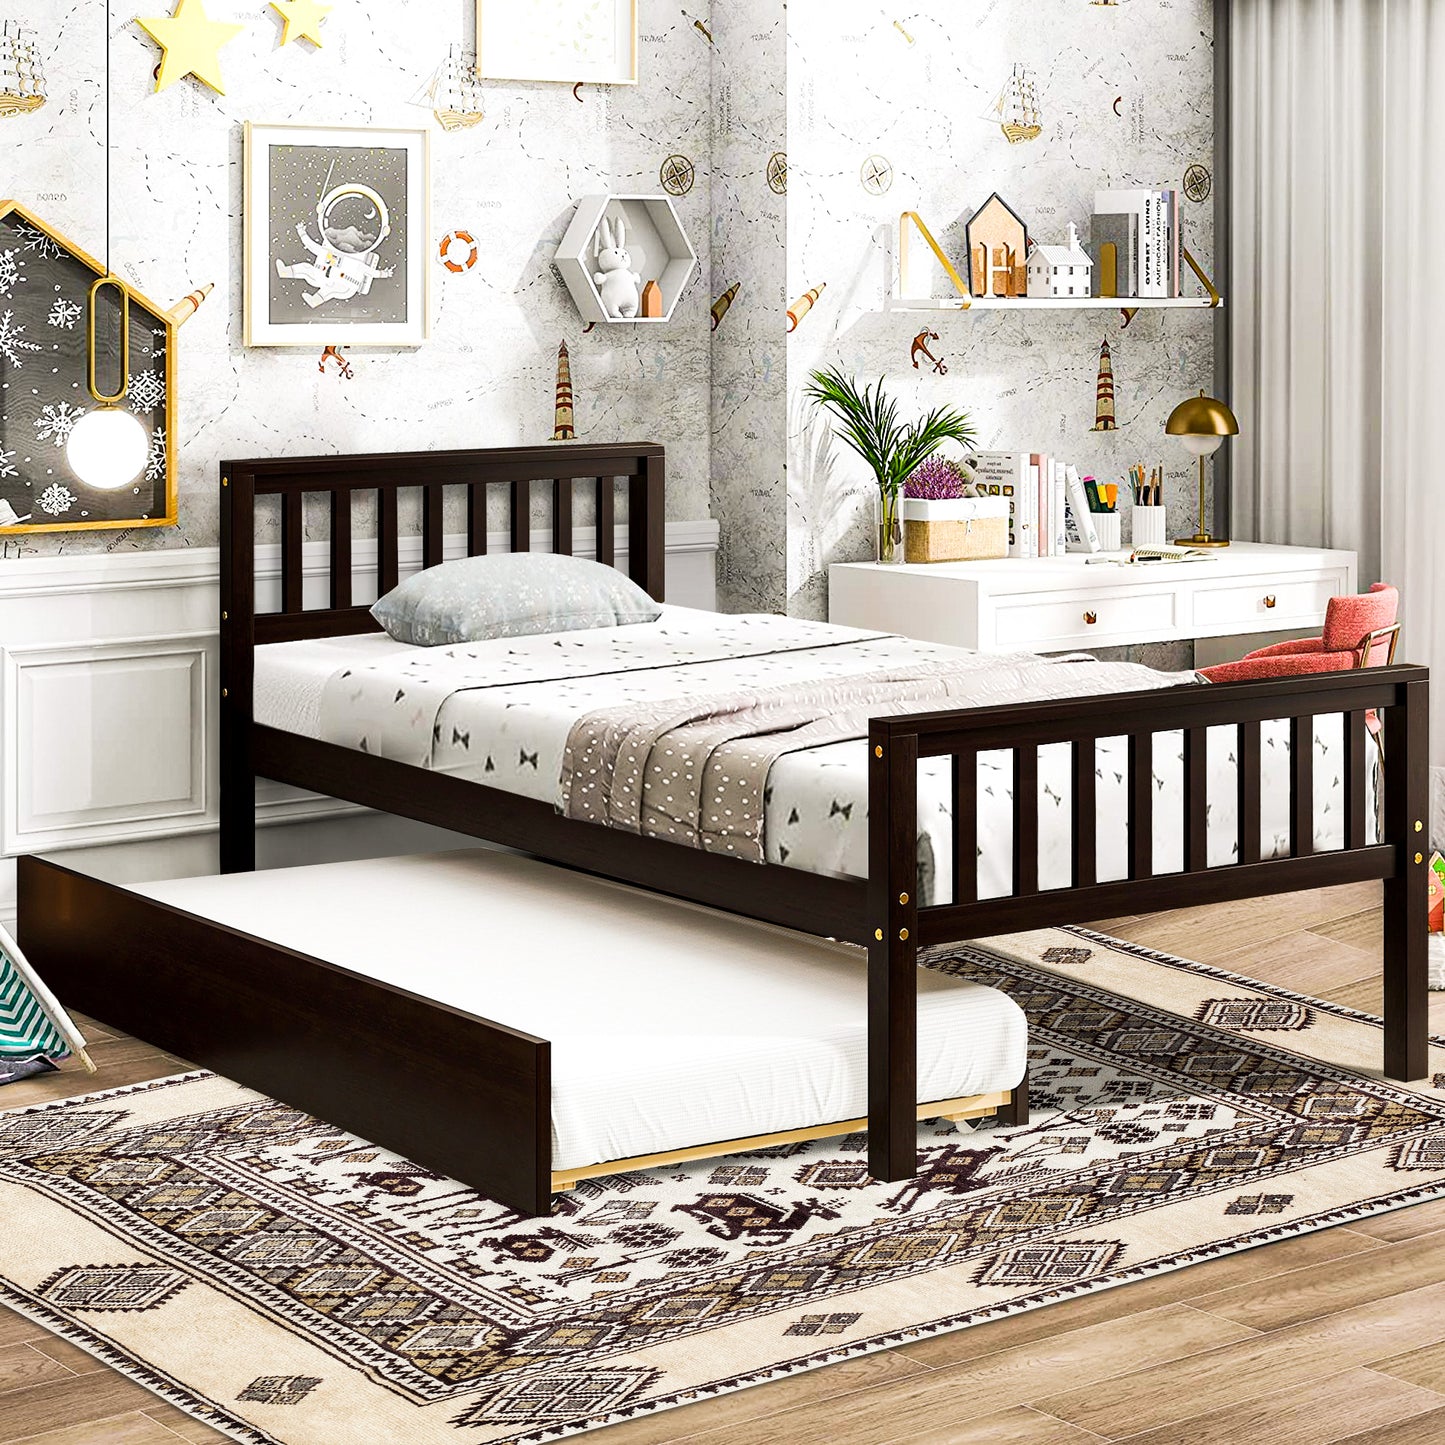 SYNGAR Espresso Twin Bed Frame with Trundle, Kids Platform Twin Size Bed with Pull Out Trundle, Solid Wood Trundle Bed with Headboard and Footboard, No Box Spring Needed, Space Saving, Easy Assembly